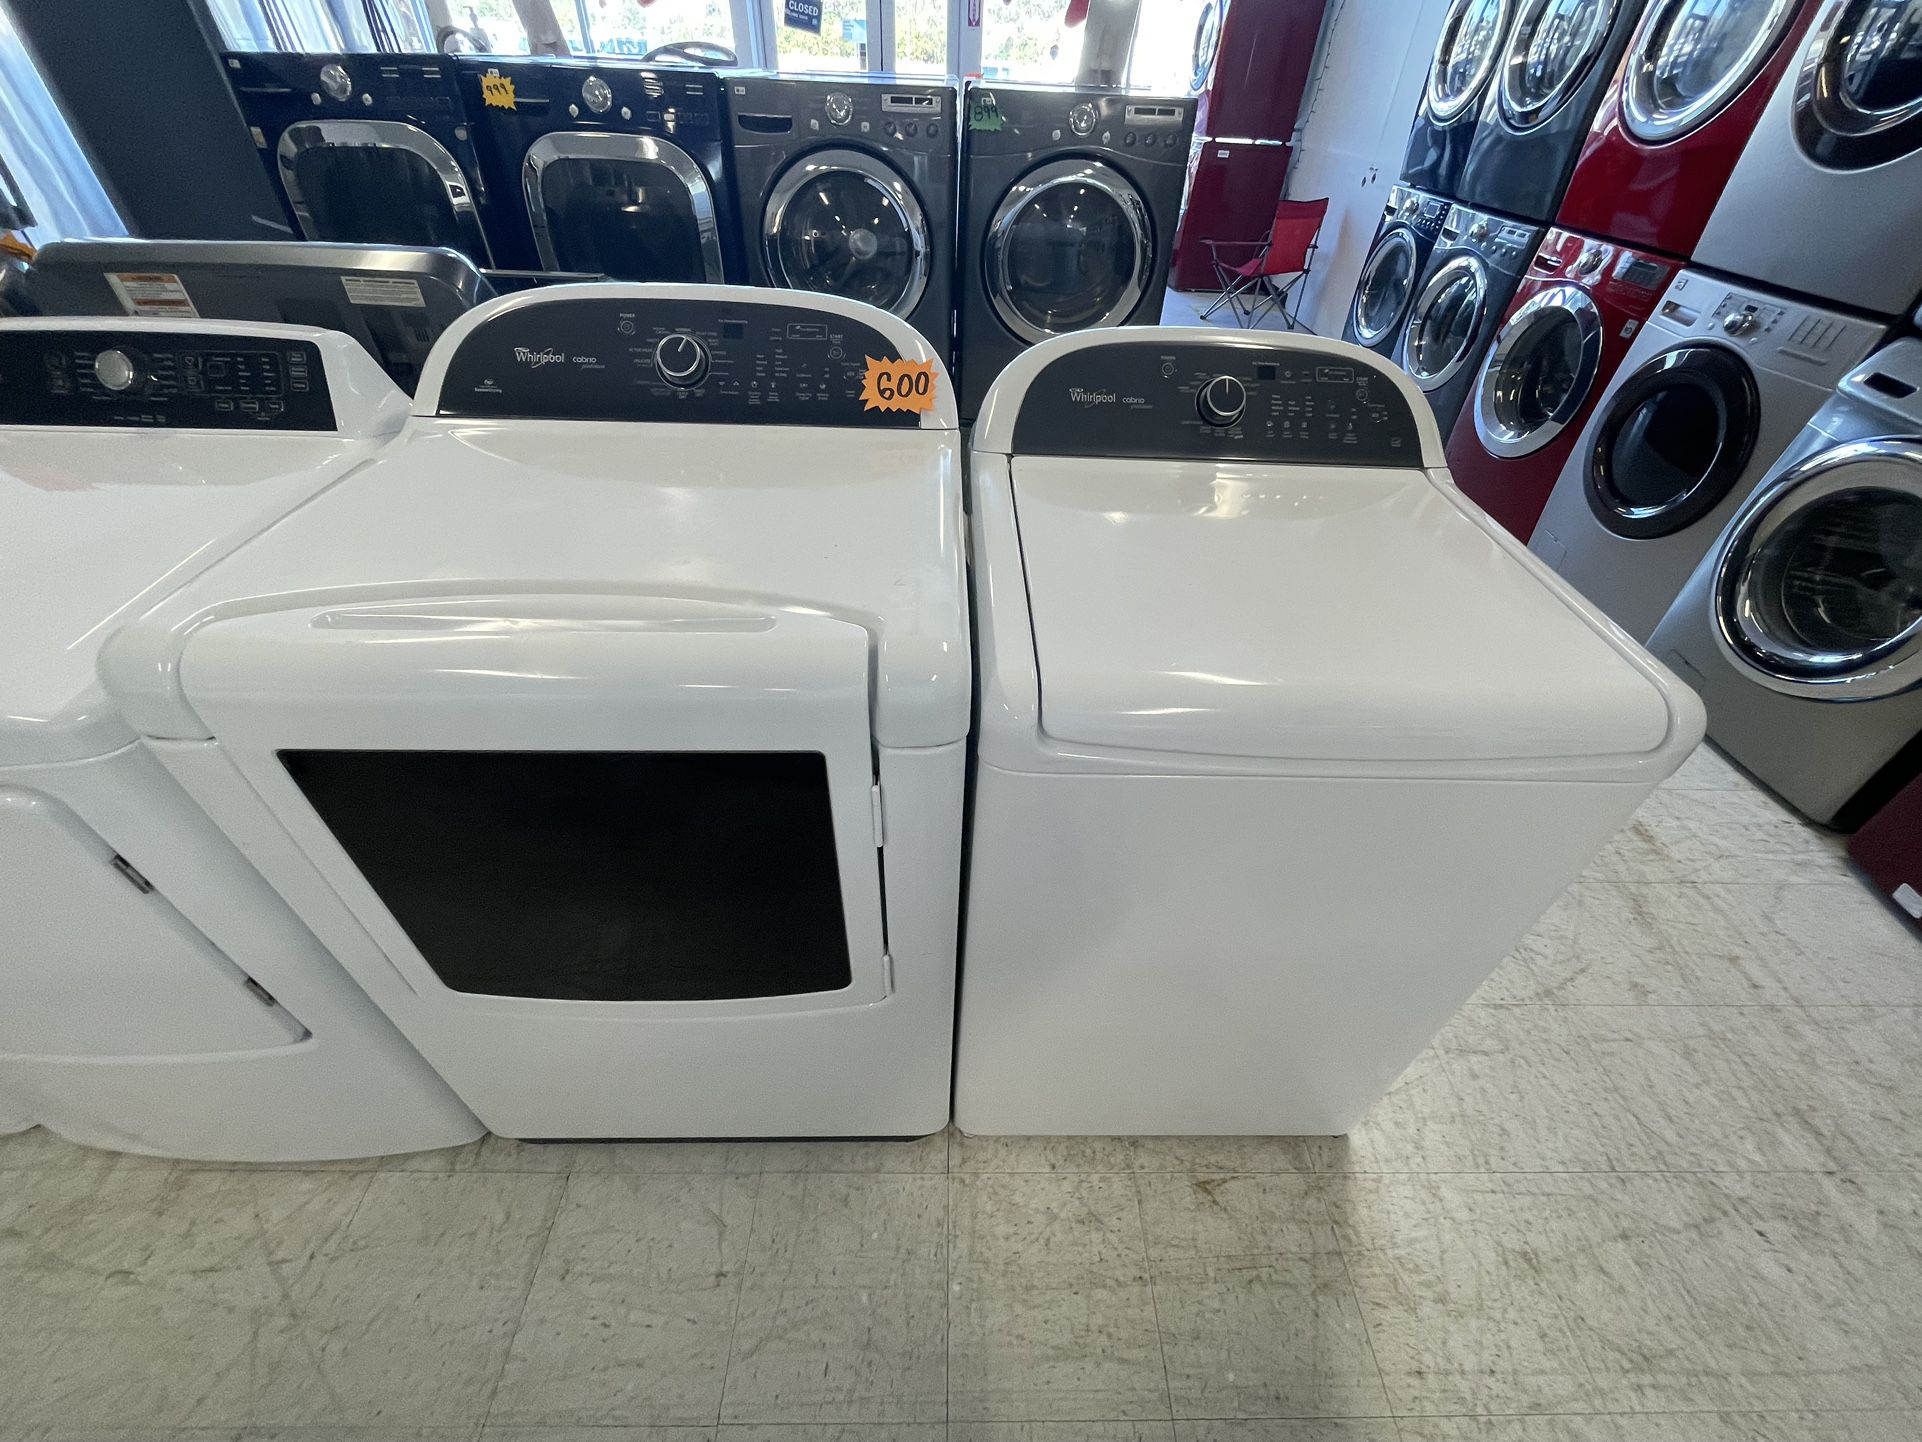 Whirpool Tap Load Washer And Electric Dryer Set Used Good Condition With 90days Warranty 